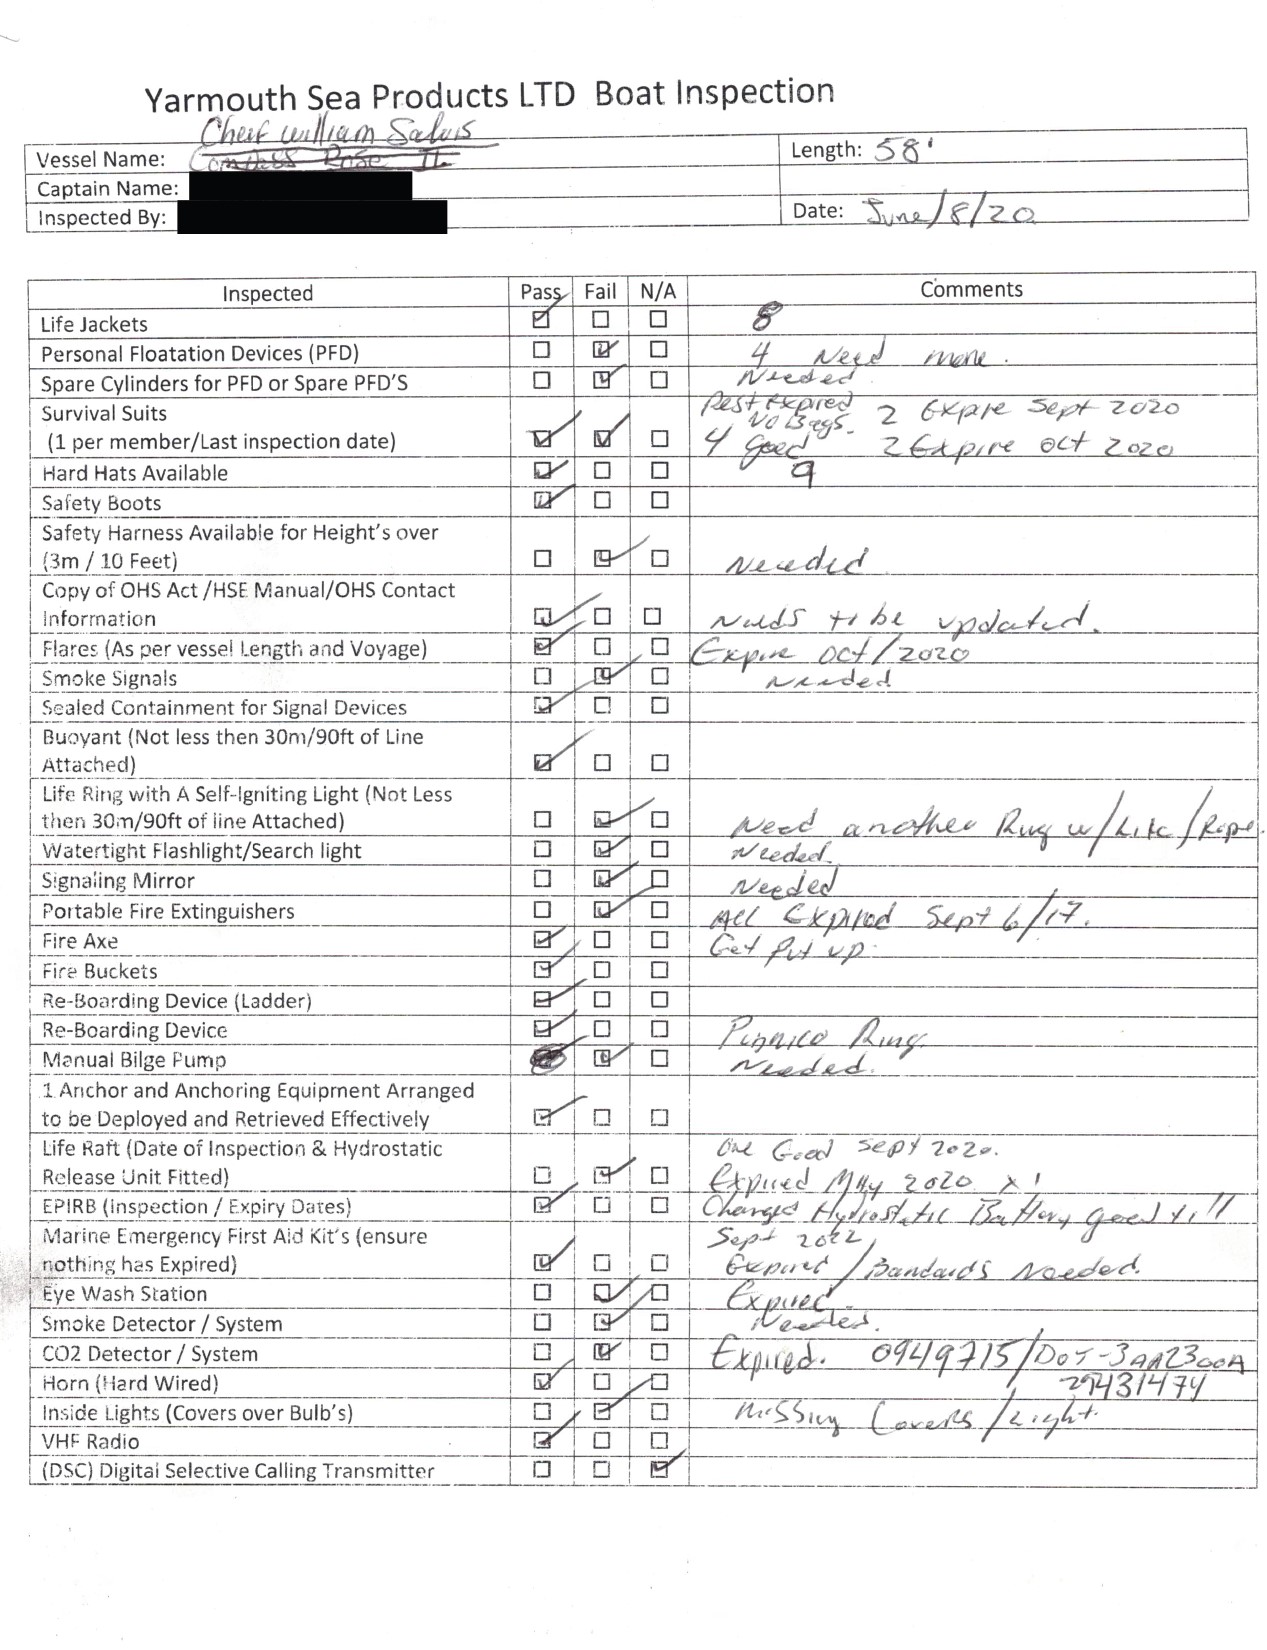 Page 1 of the boat inspection checklist for the Chief William Saulis completed on 08 June 2020 (Source: Yarmouth Sea Products Limited)